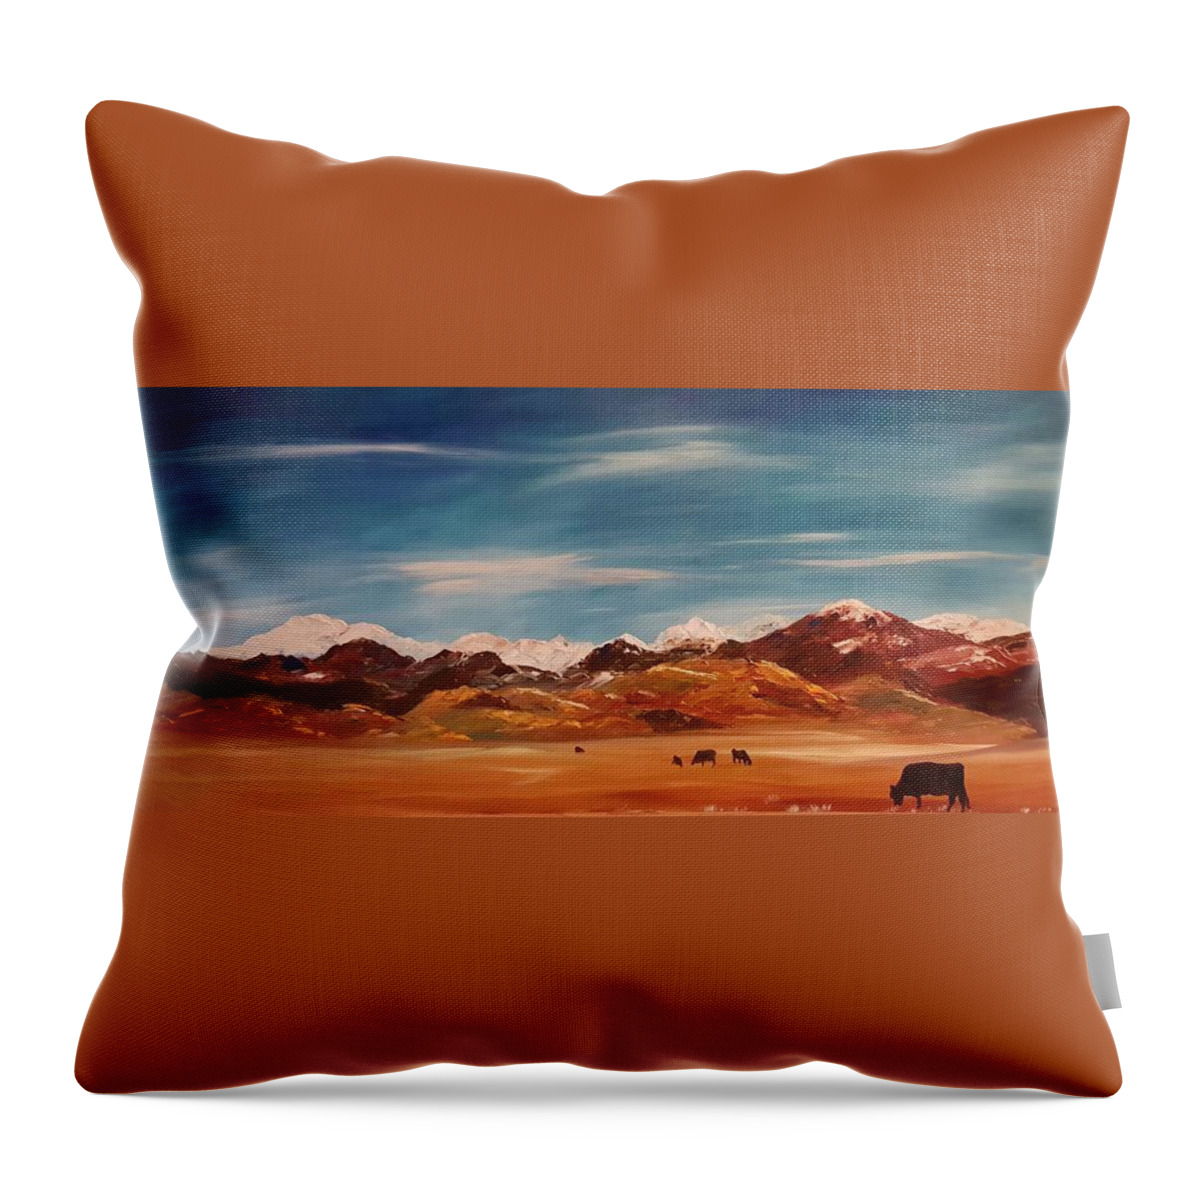 Alder Montana Throw Pillow featuring the painting By Alder -Tobacco Root Mountains by Cheryl Nancy Ann Gordon